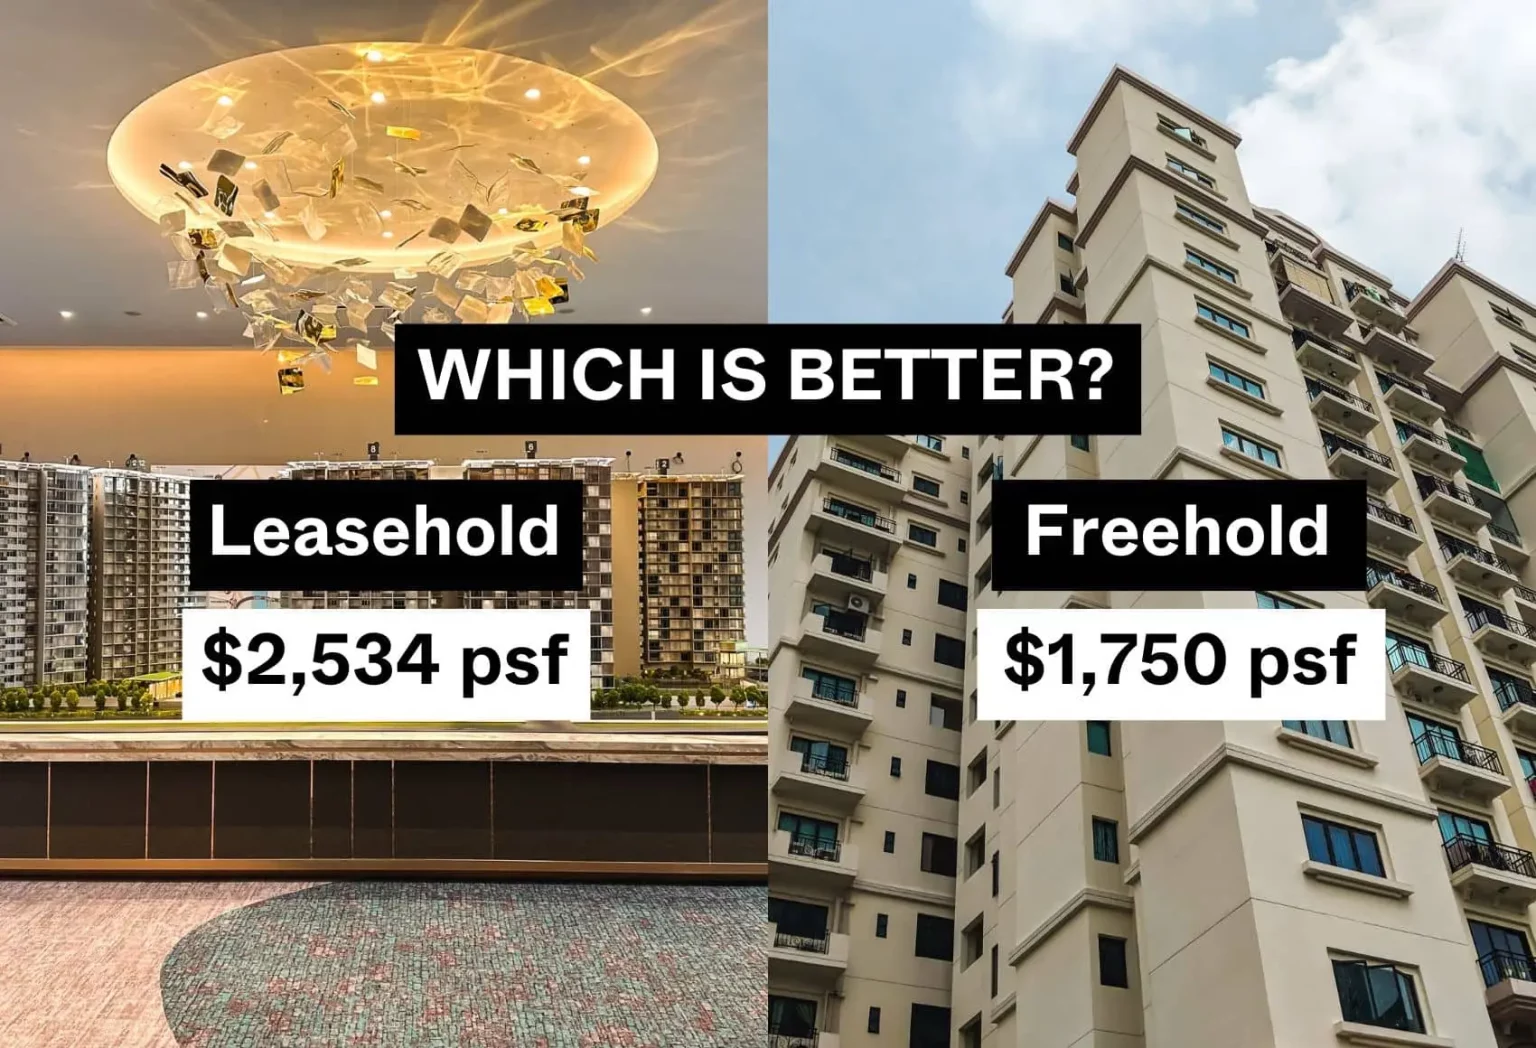 leasehold vs freehold which is better